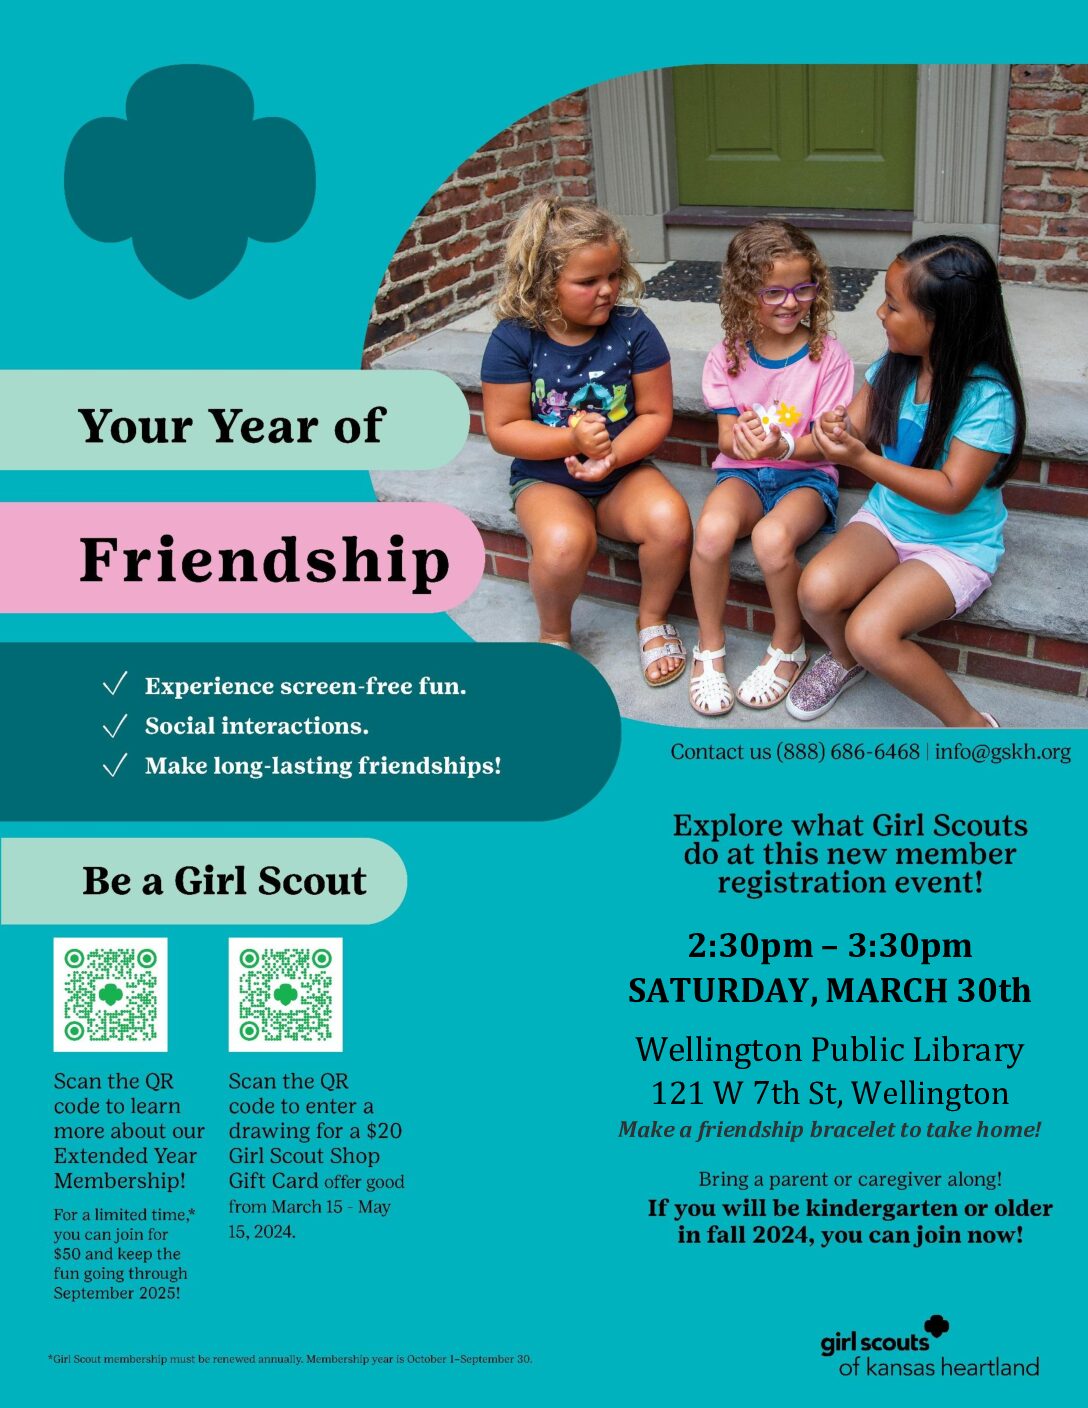 Explore Girl Scouts on March 30th